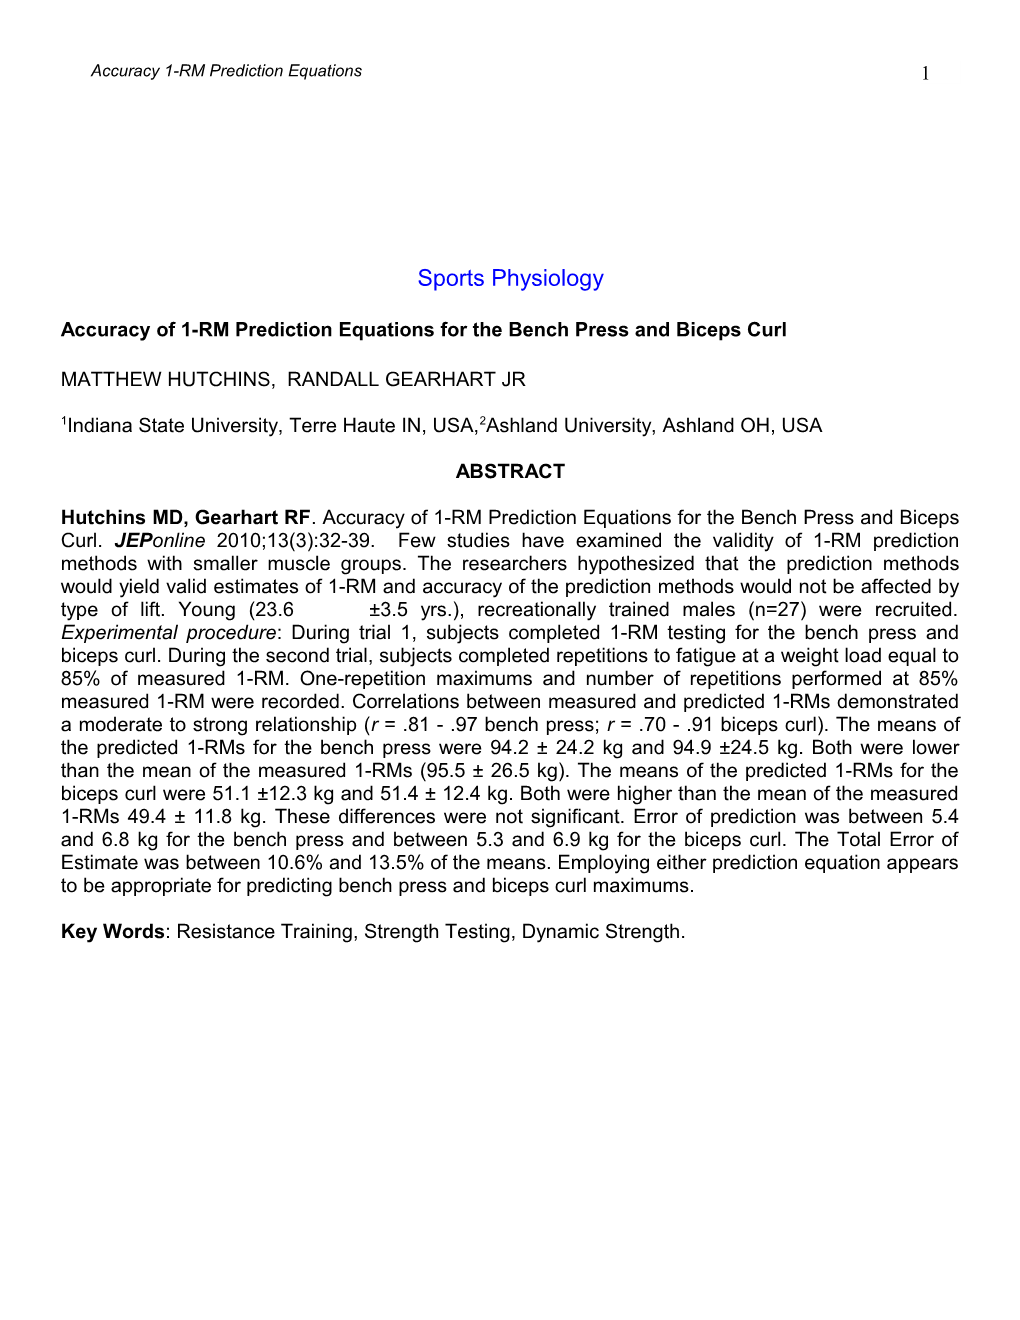 Accuracy of 1-RM Prediction Equations for the Bench Press and Biceps Curl